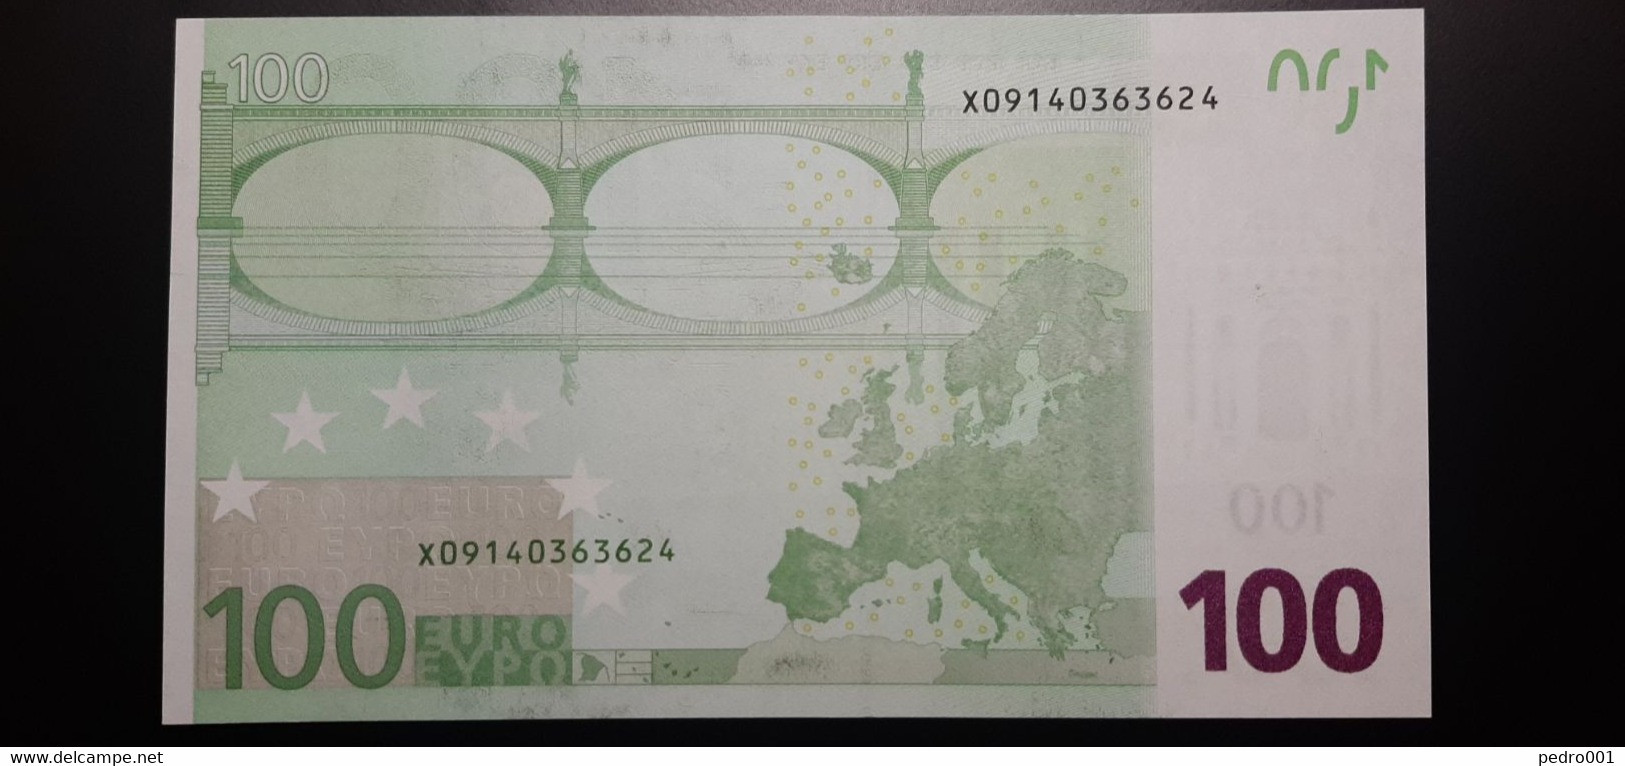 100 Euro Germany R001 D1 UNC - 100 Euro